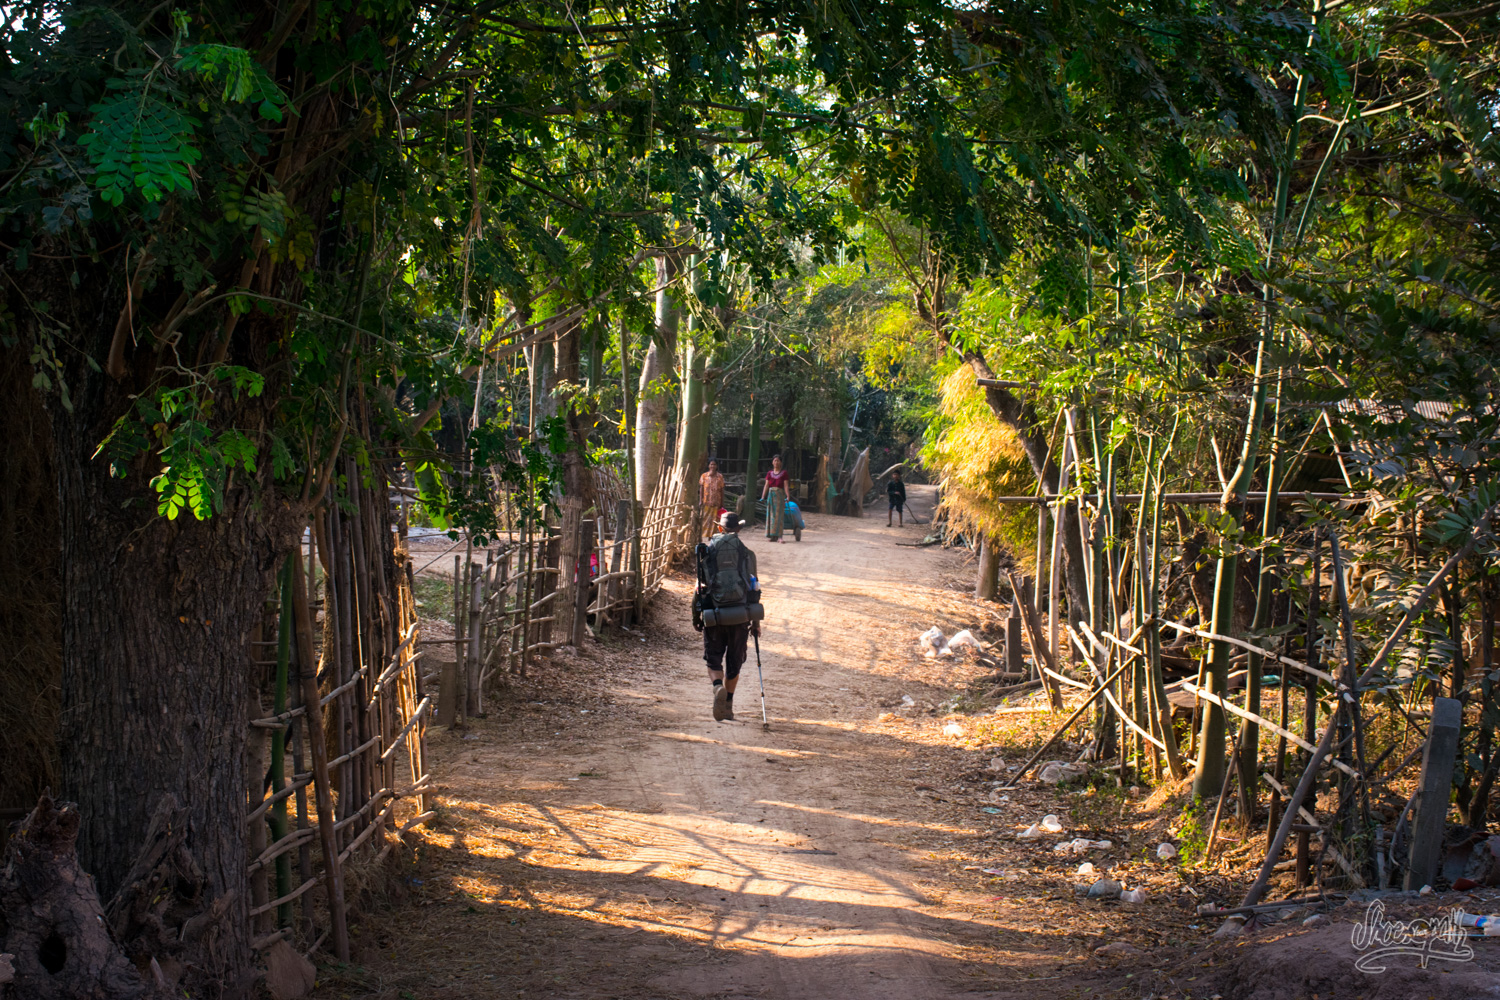 Quentin, early morning on our little track along the Mekong